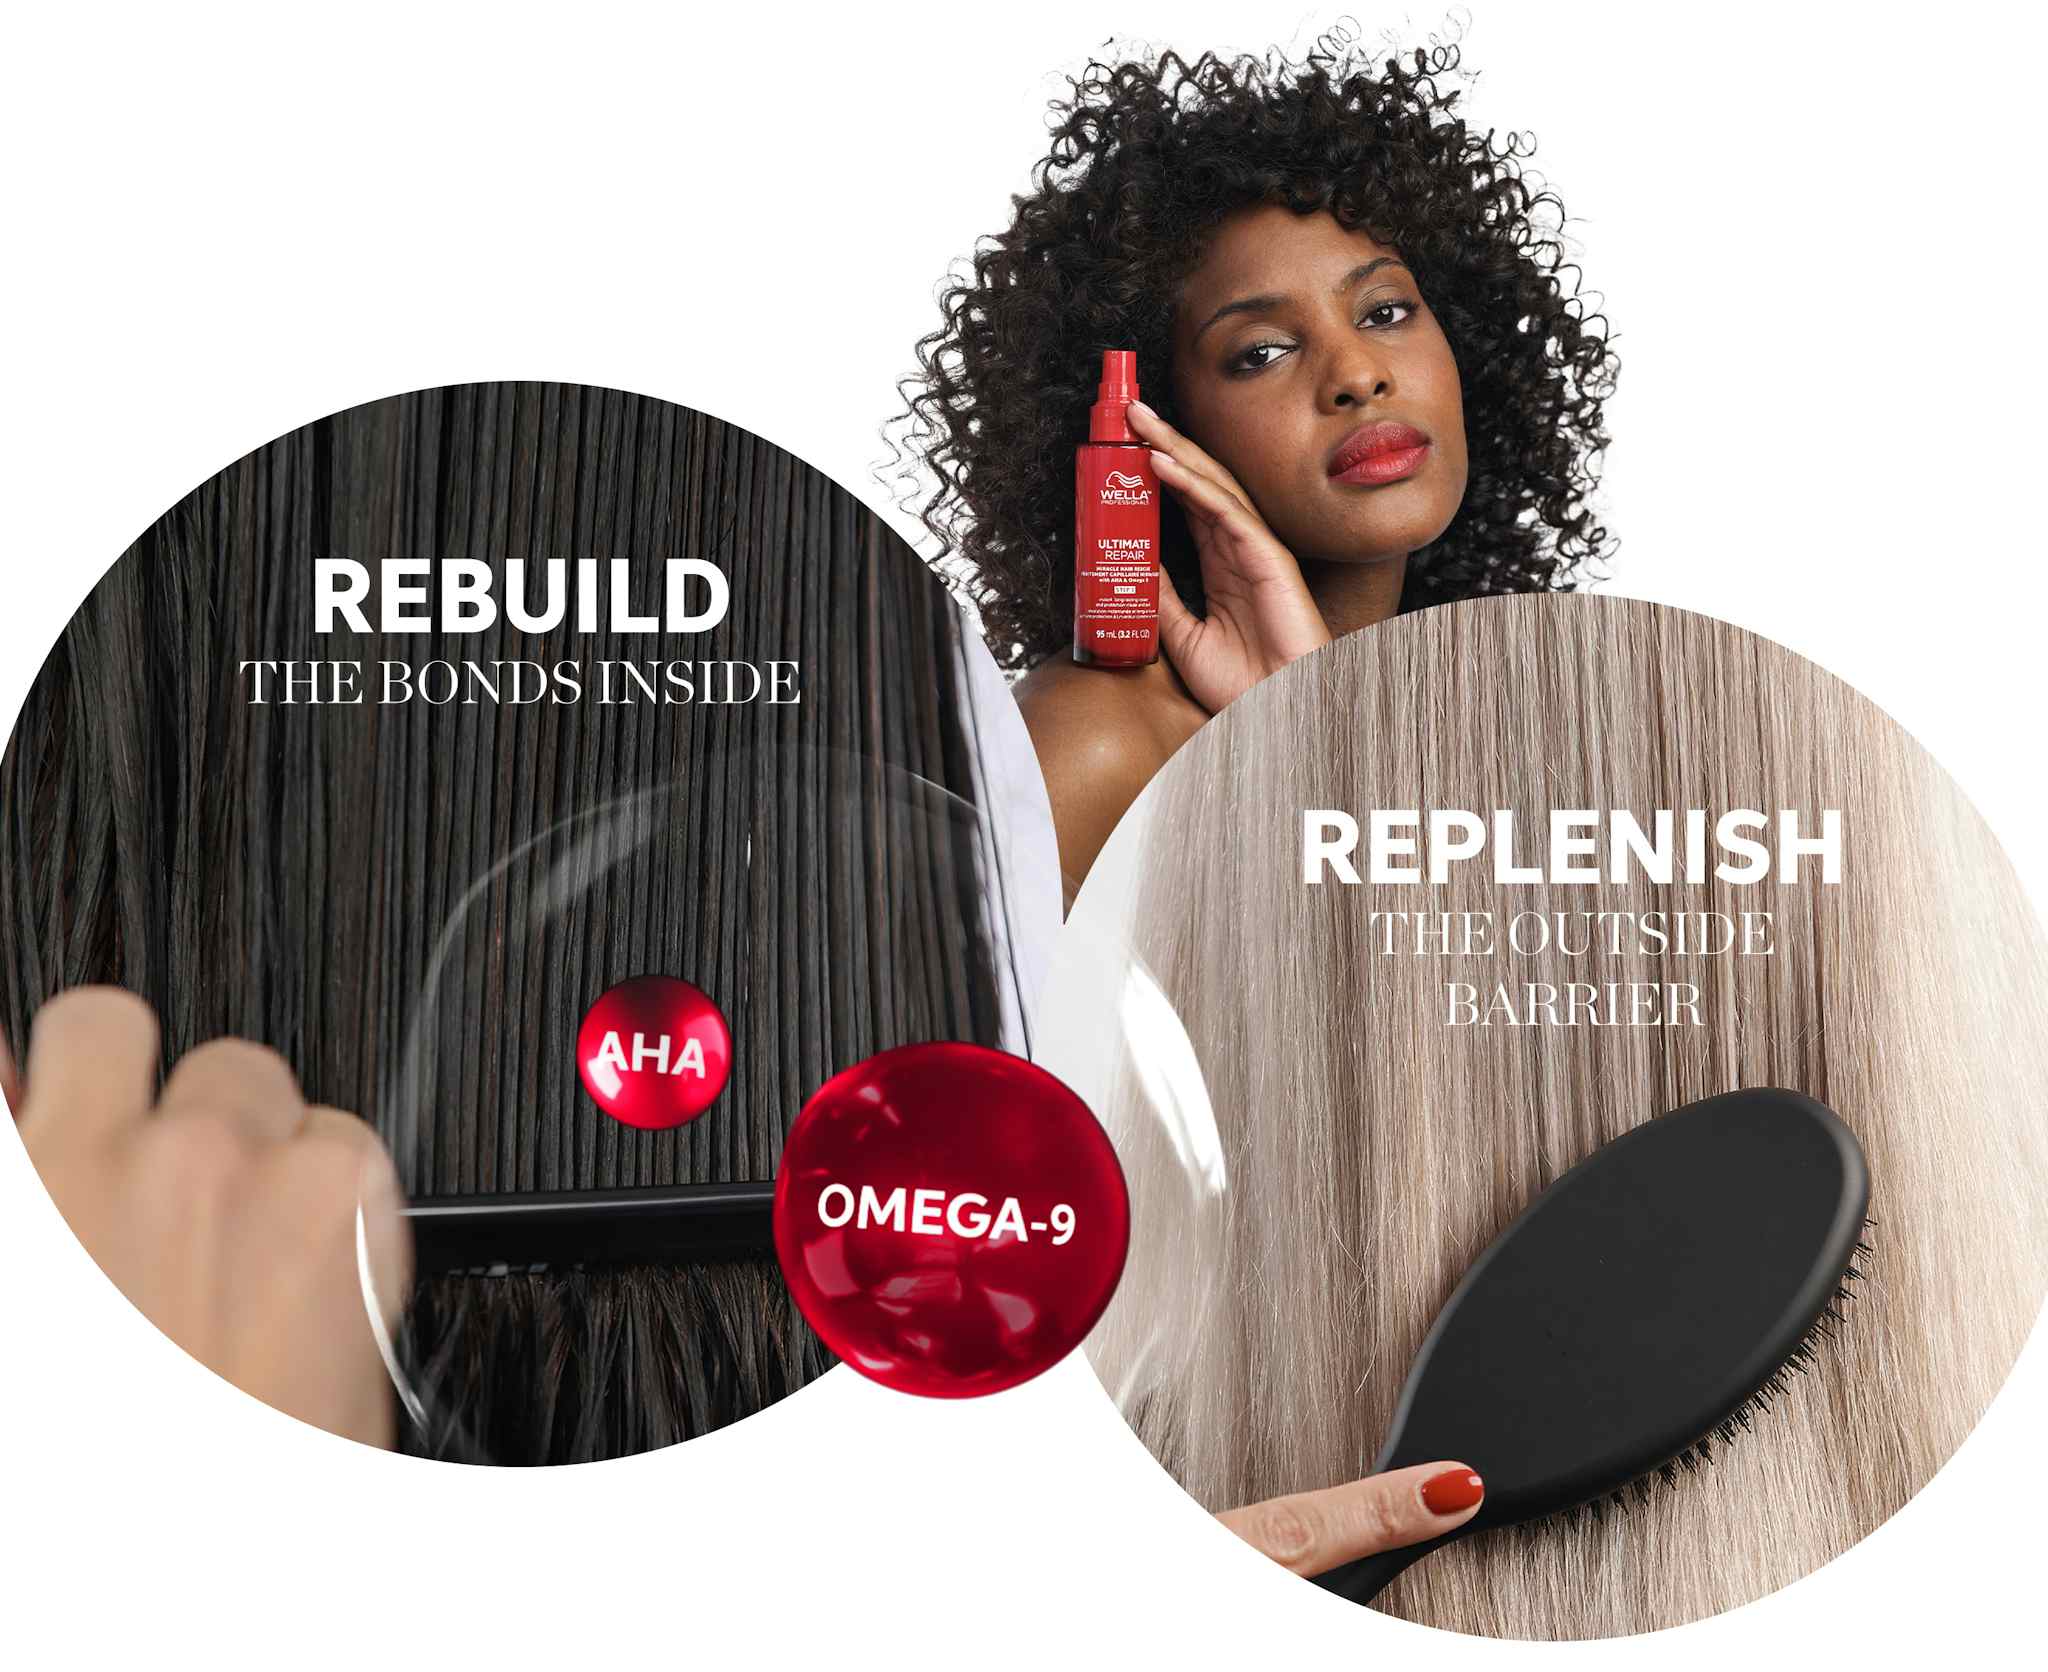 Representation of Omega-9 and AHA molecules components of Ultimate Repair formula for rebuild and replenish of the hair